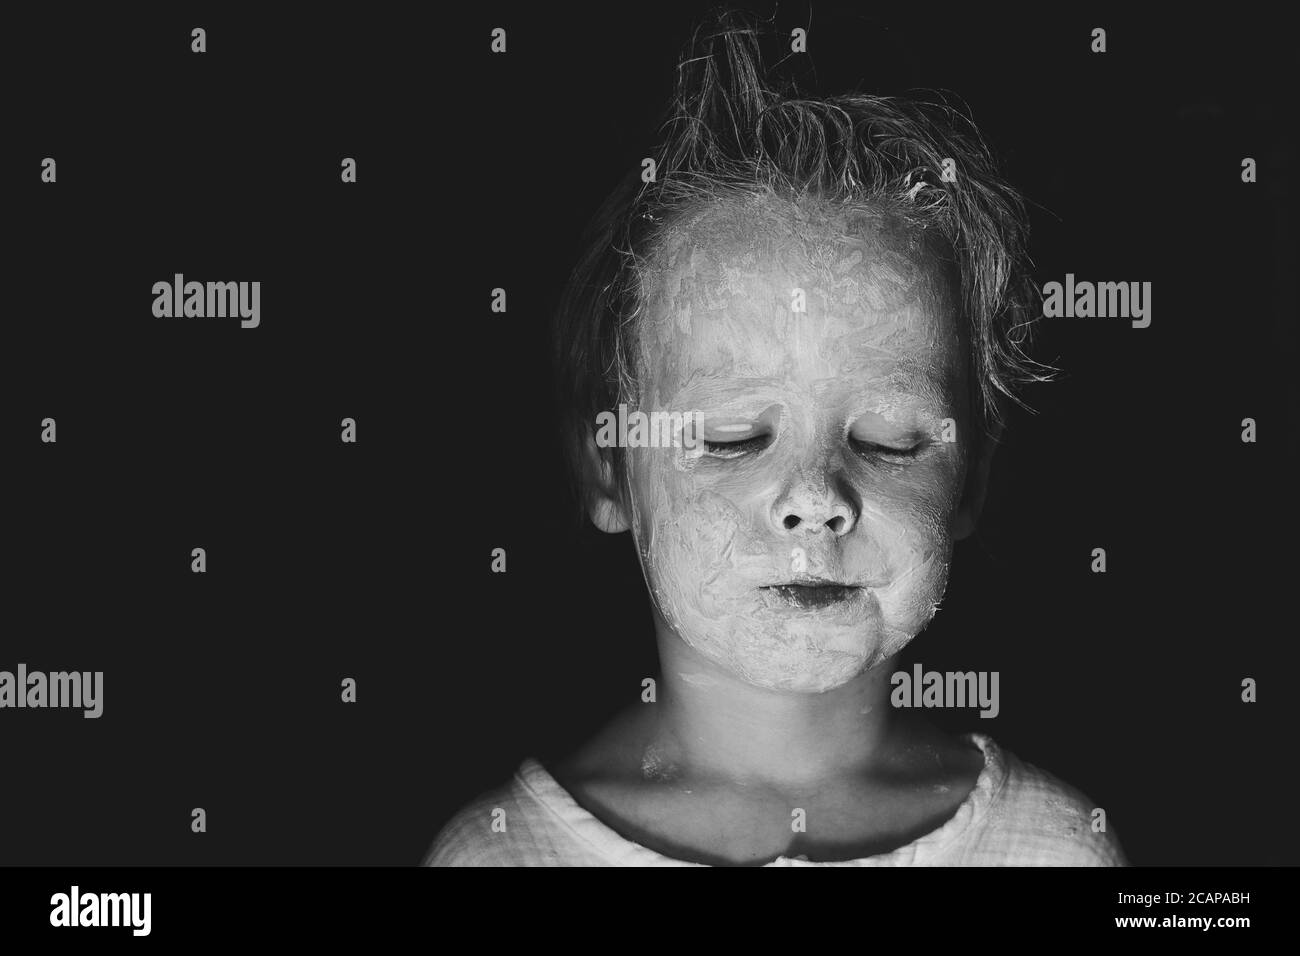 scary little child with a smeared white clay or make-up face monochrome black and white. Stock Photo